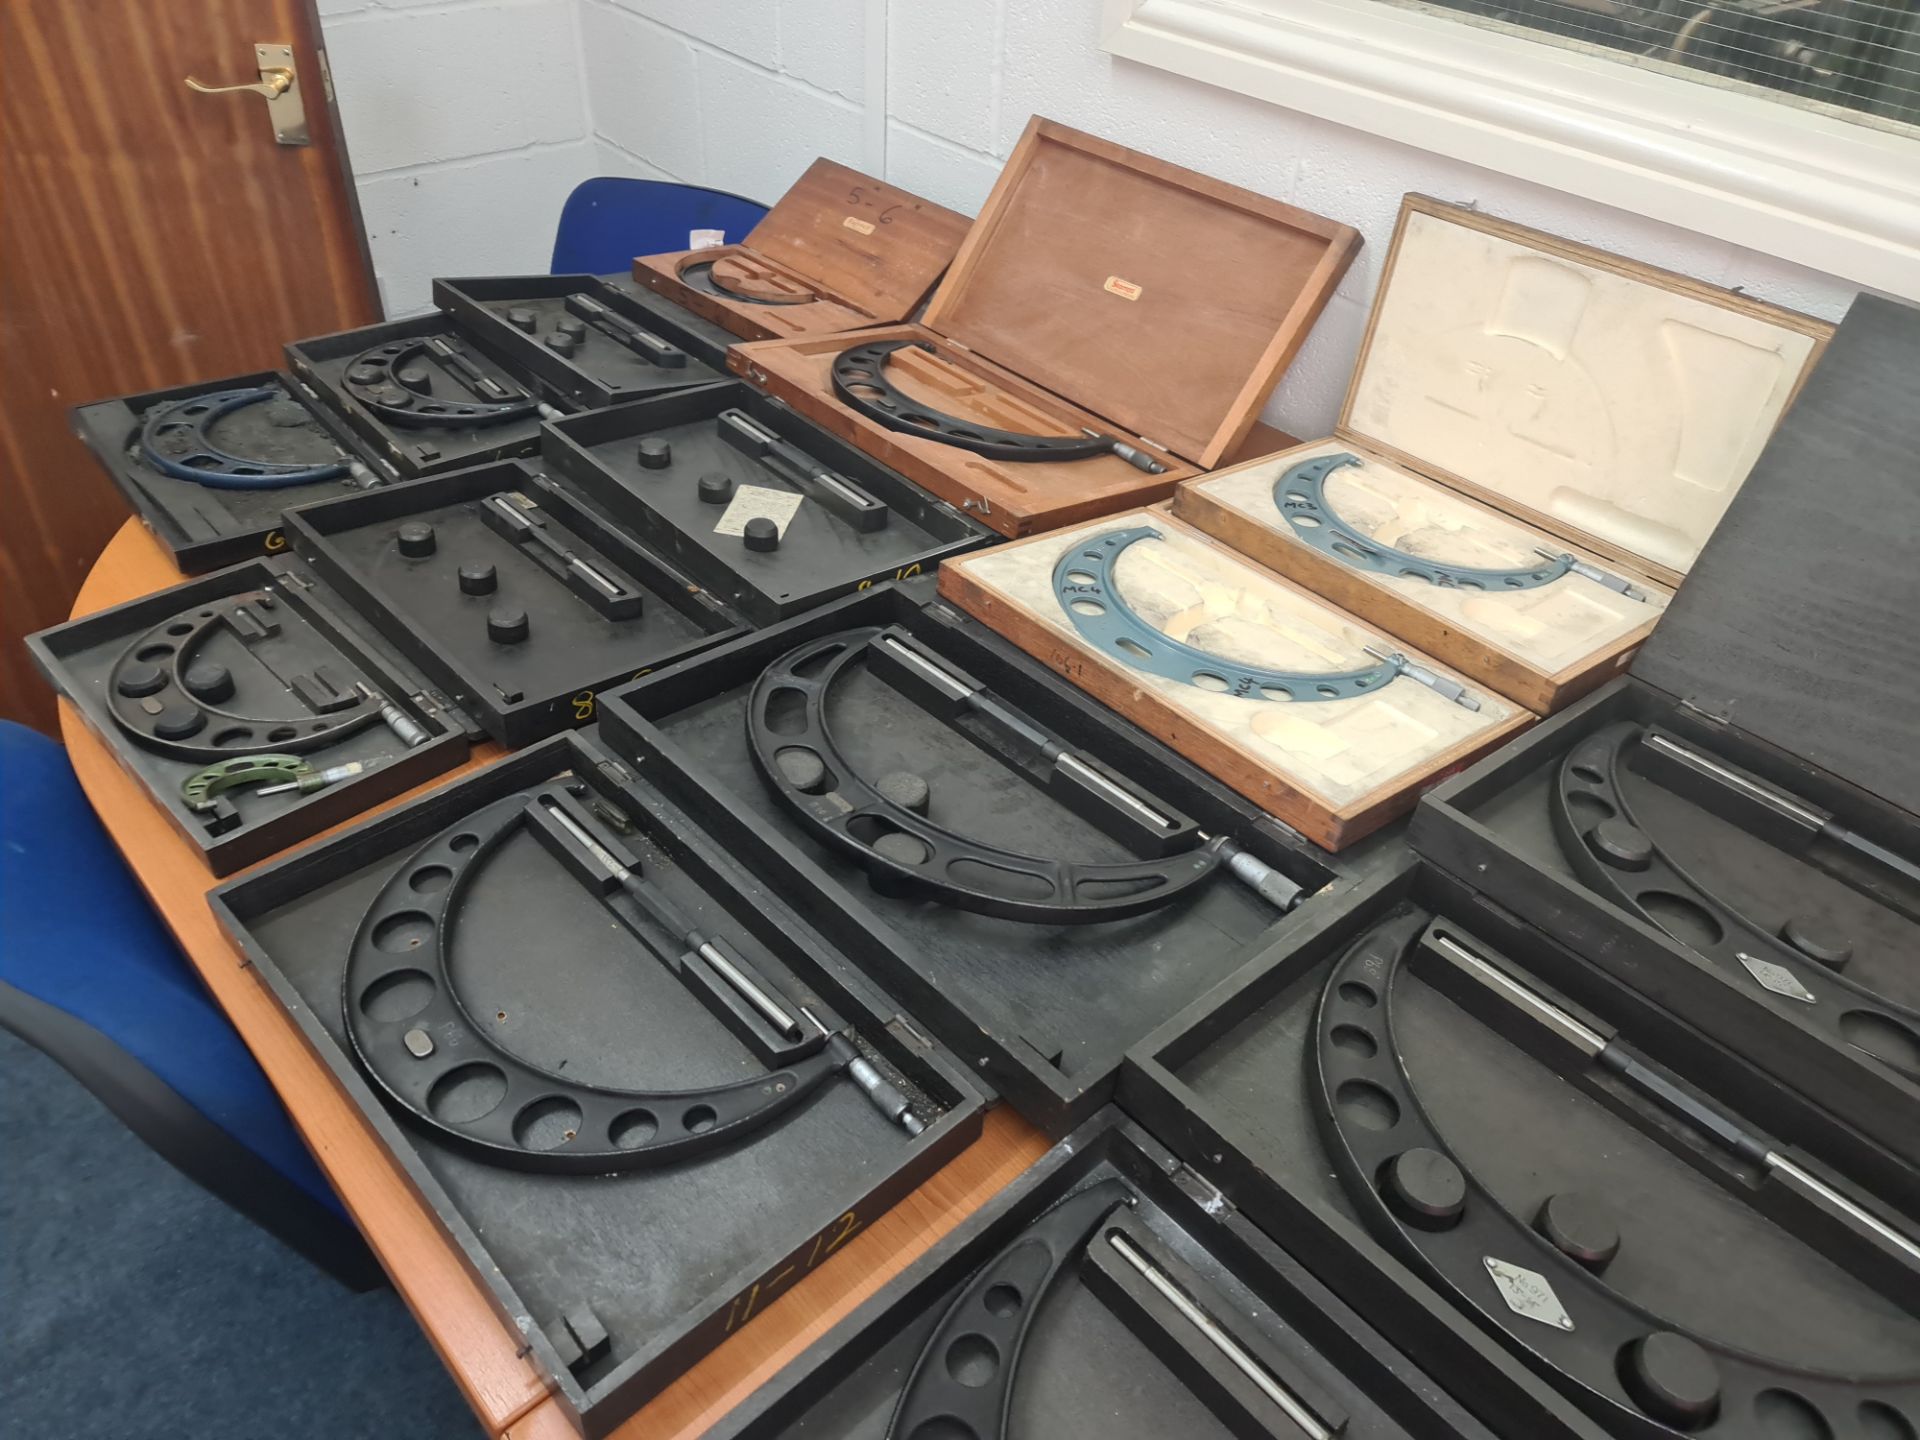 Large quantity of micrometers, callipers & other measuring equipment comprising trolley & contents.